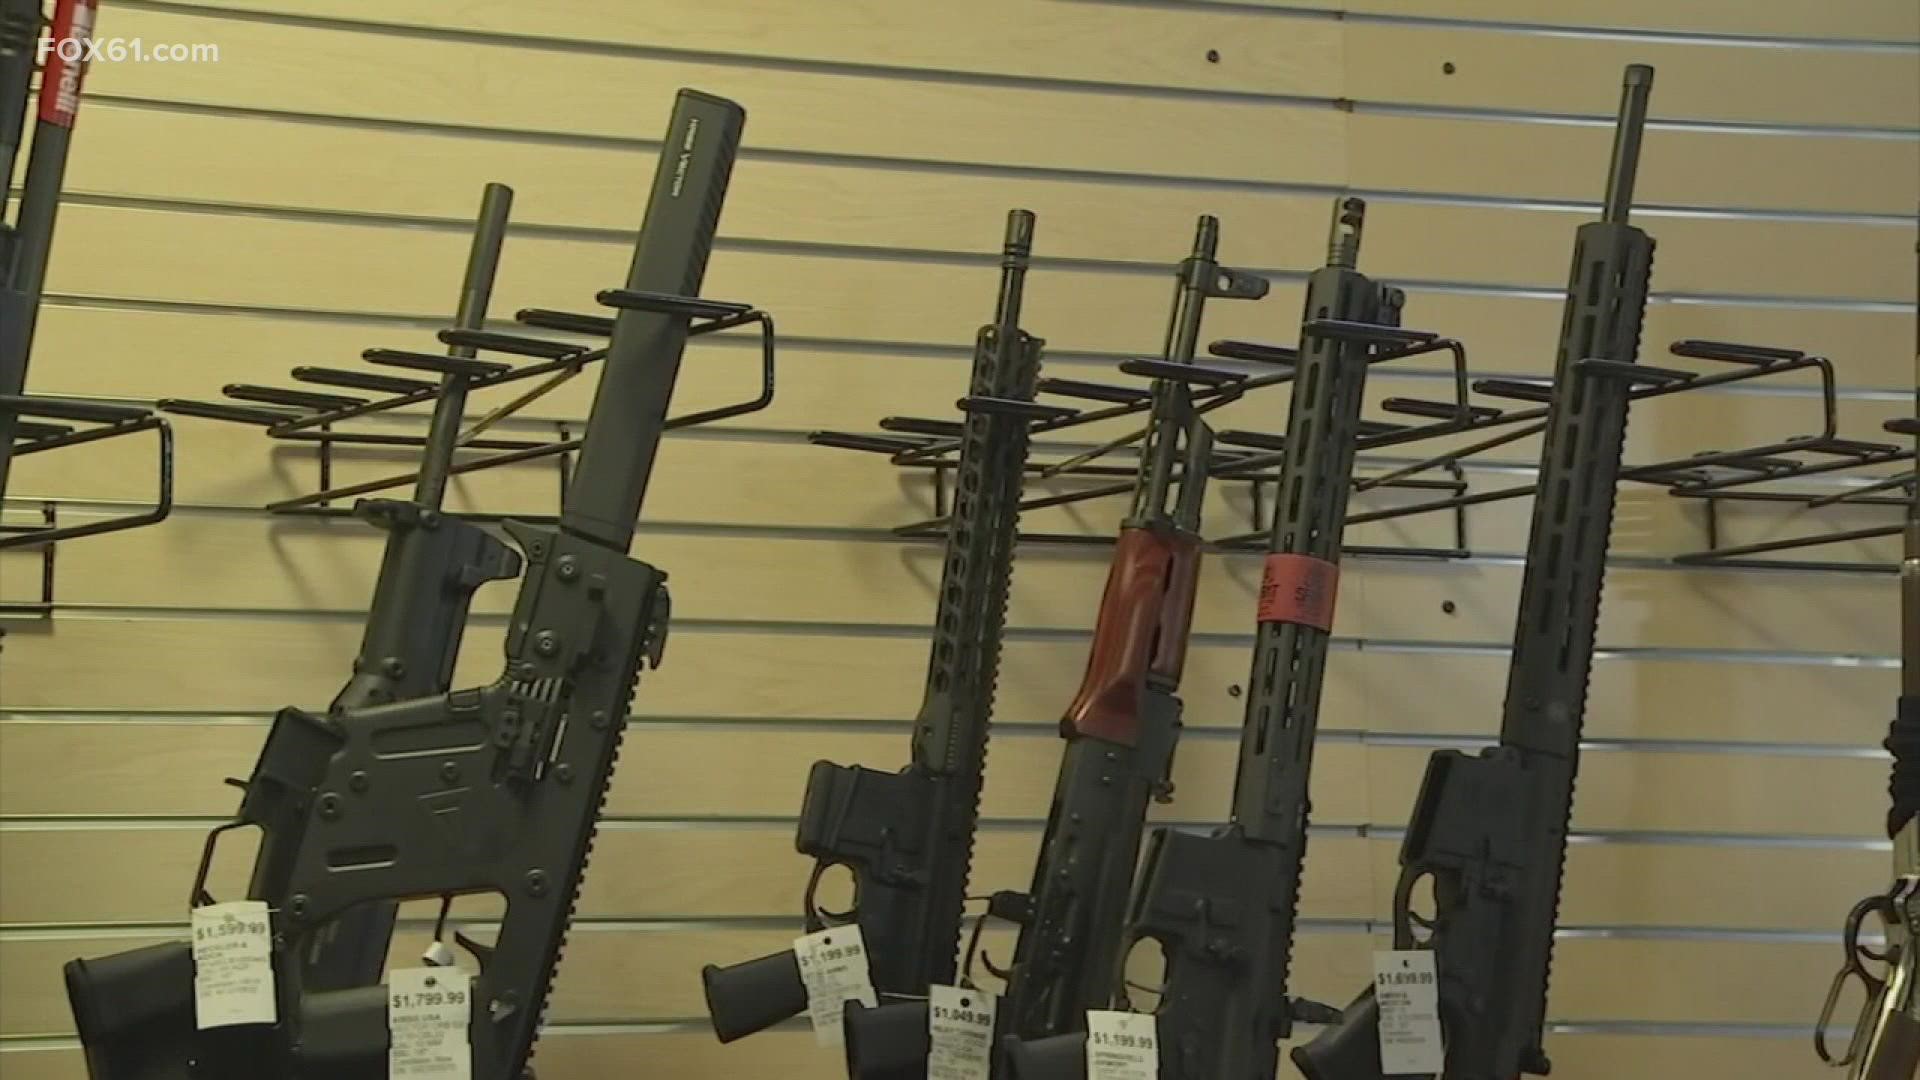 The re-introduced bill would ban the sale, transfer, importation and manufacture of 205 military-style assault weapons across the country.